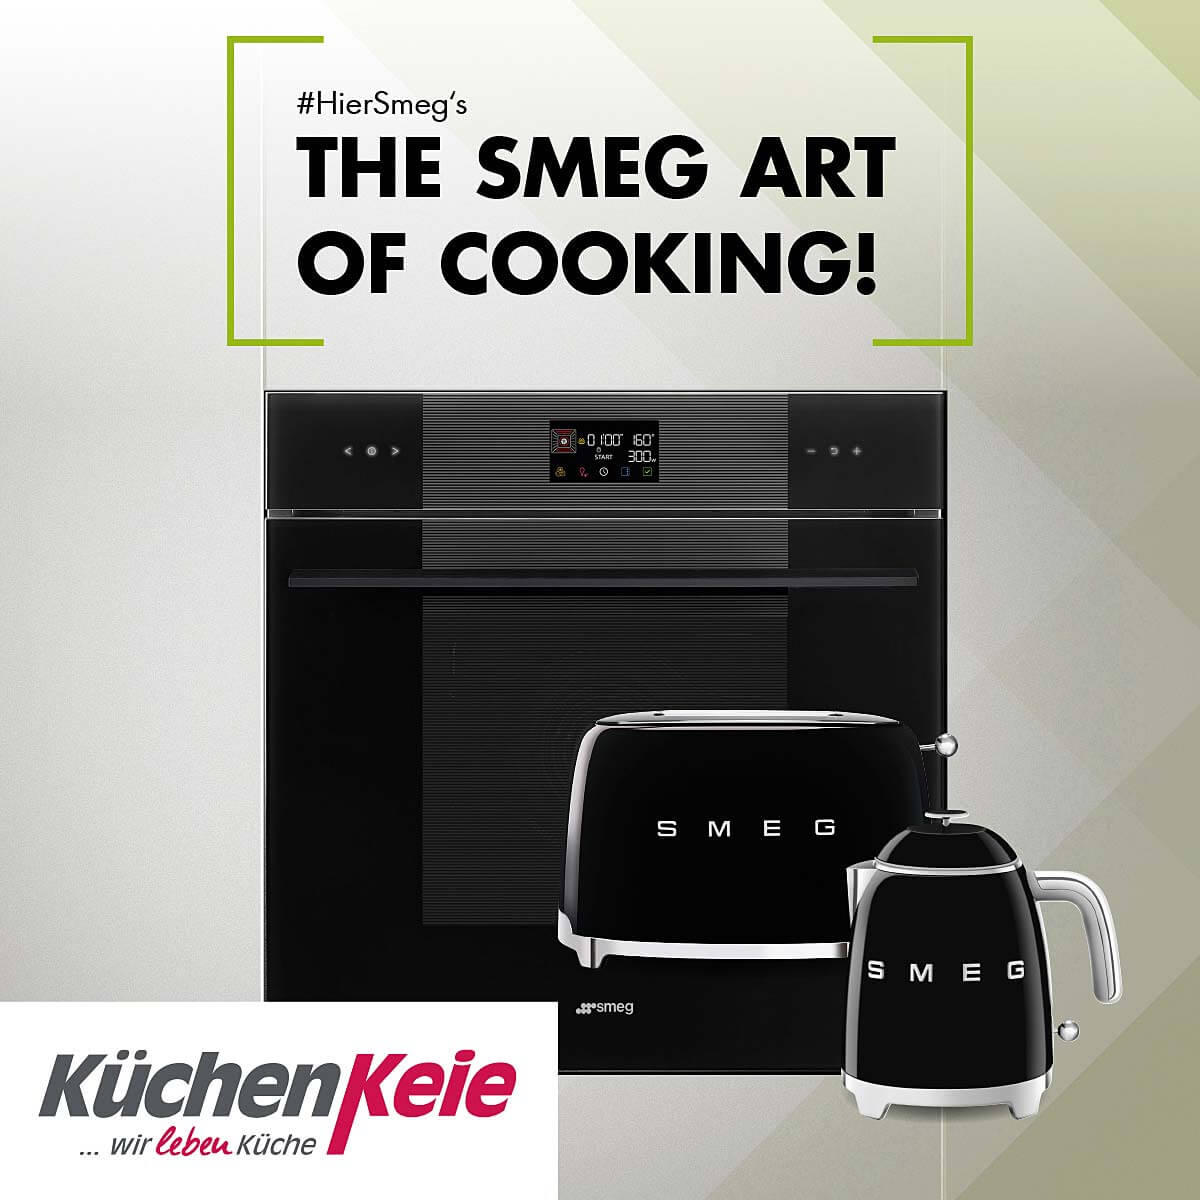 THE SMEG ART OF COOKING!